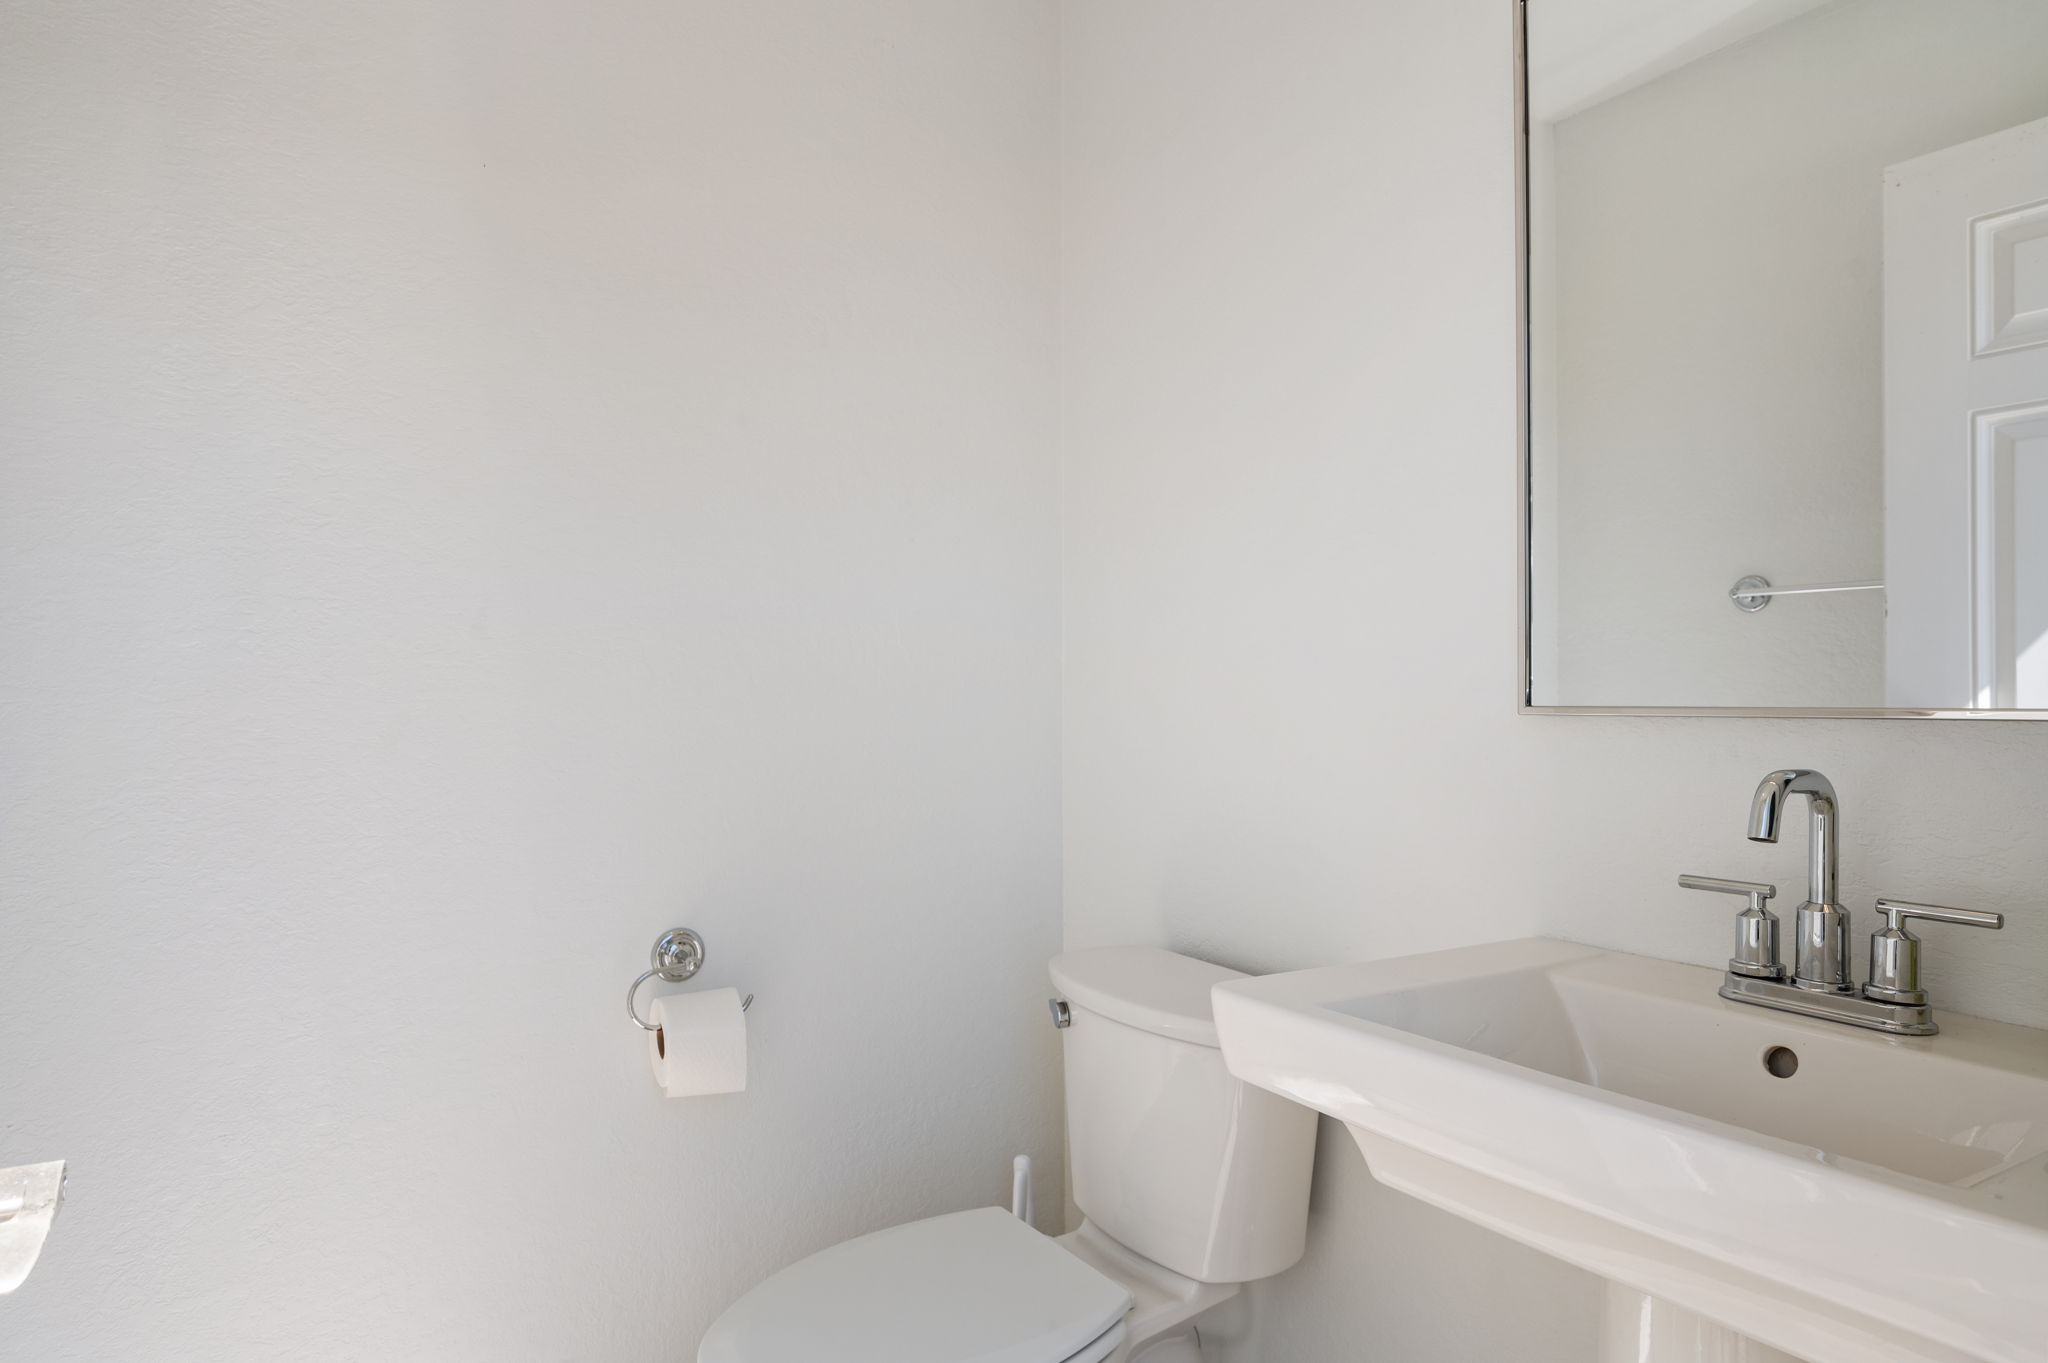 2032 Martins Point Rd | Private Pool - Pool House Restroom